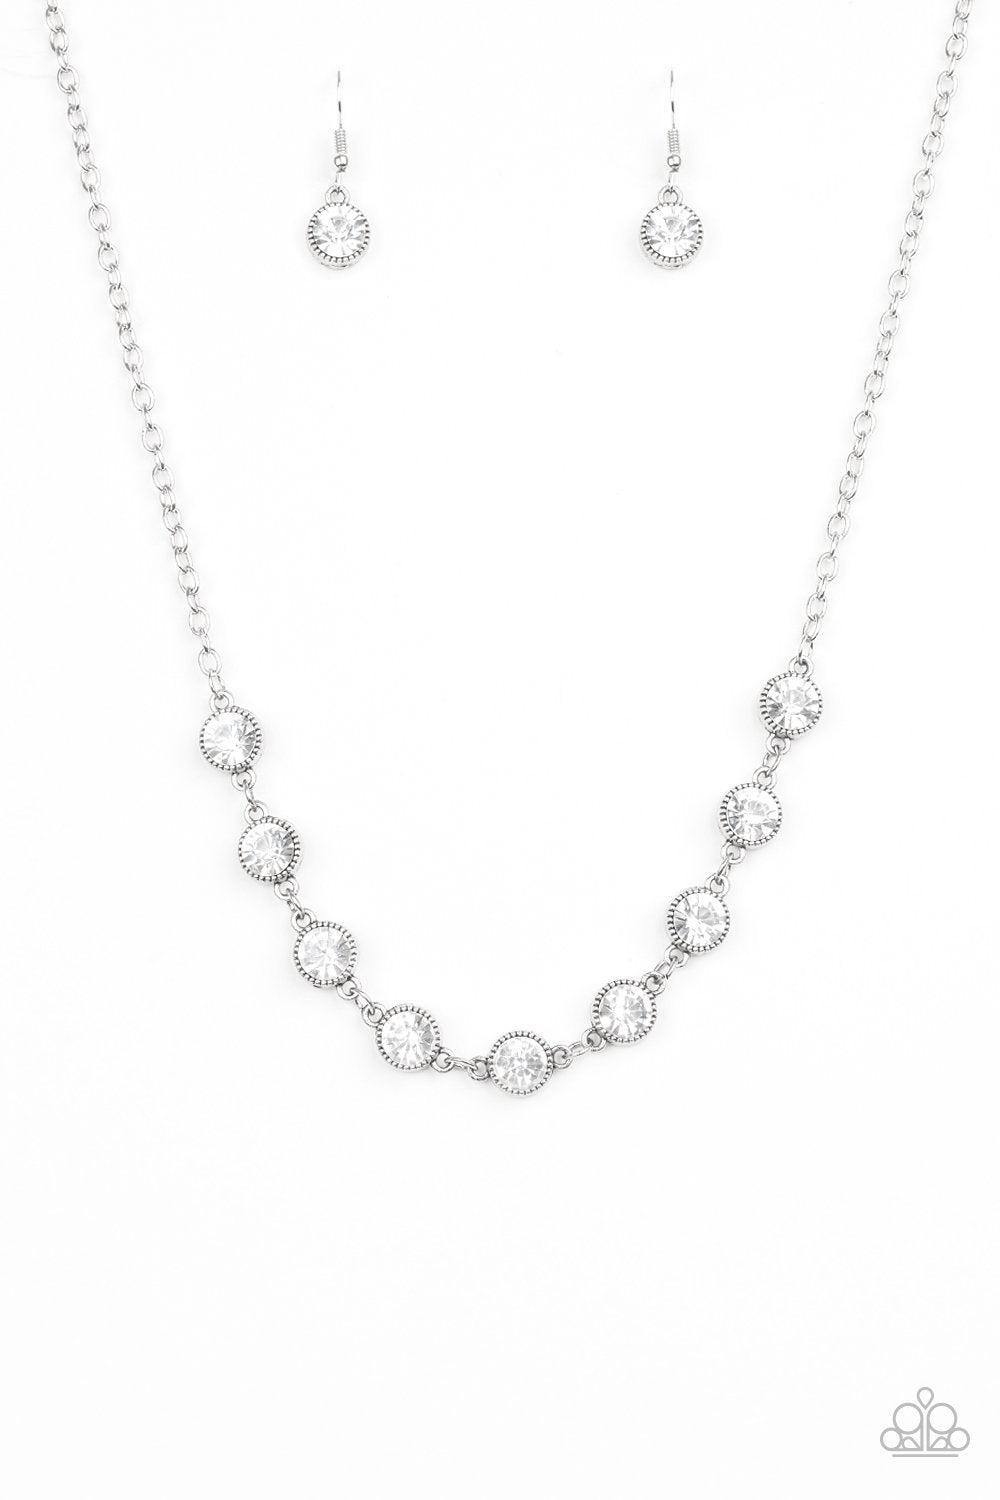 Starlit Socials White Necklace and matching Earrings - Paparazzi Accessories-CarasShop.com - $5 Jewelry by Cara Jewels